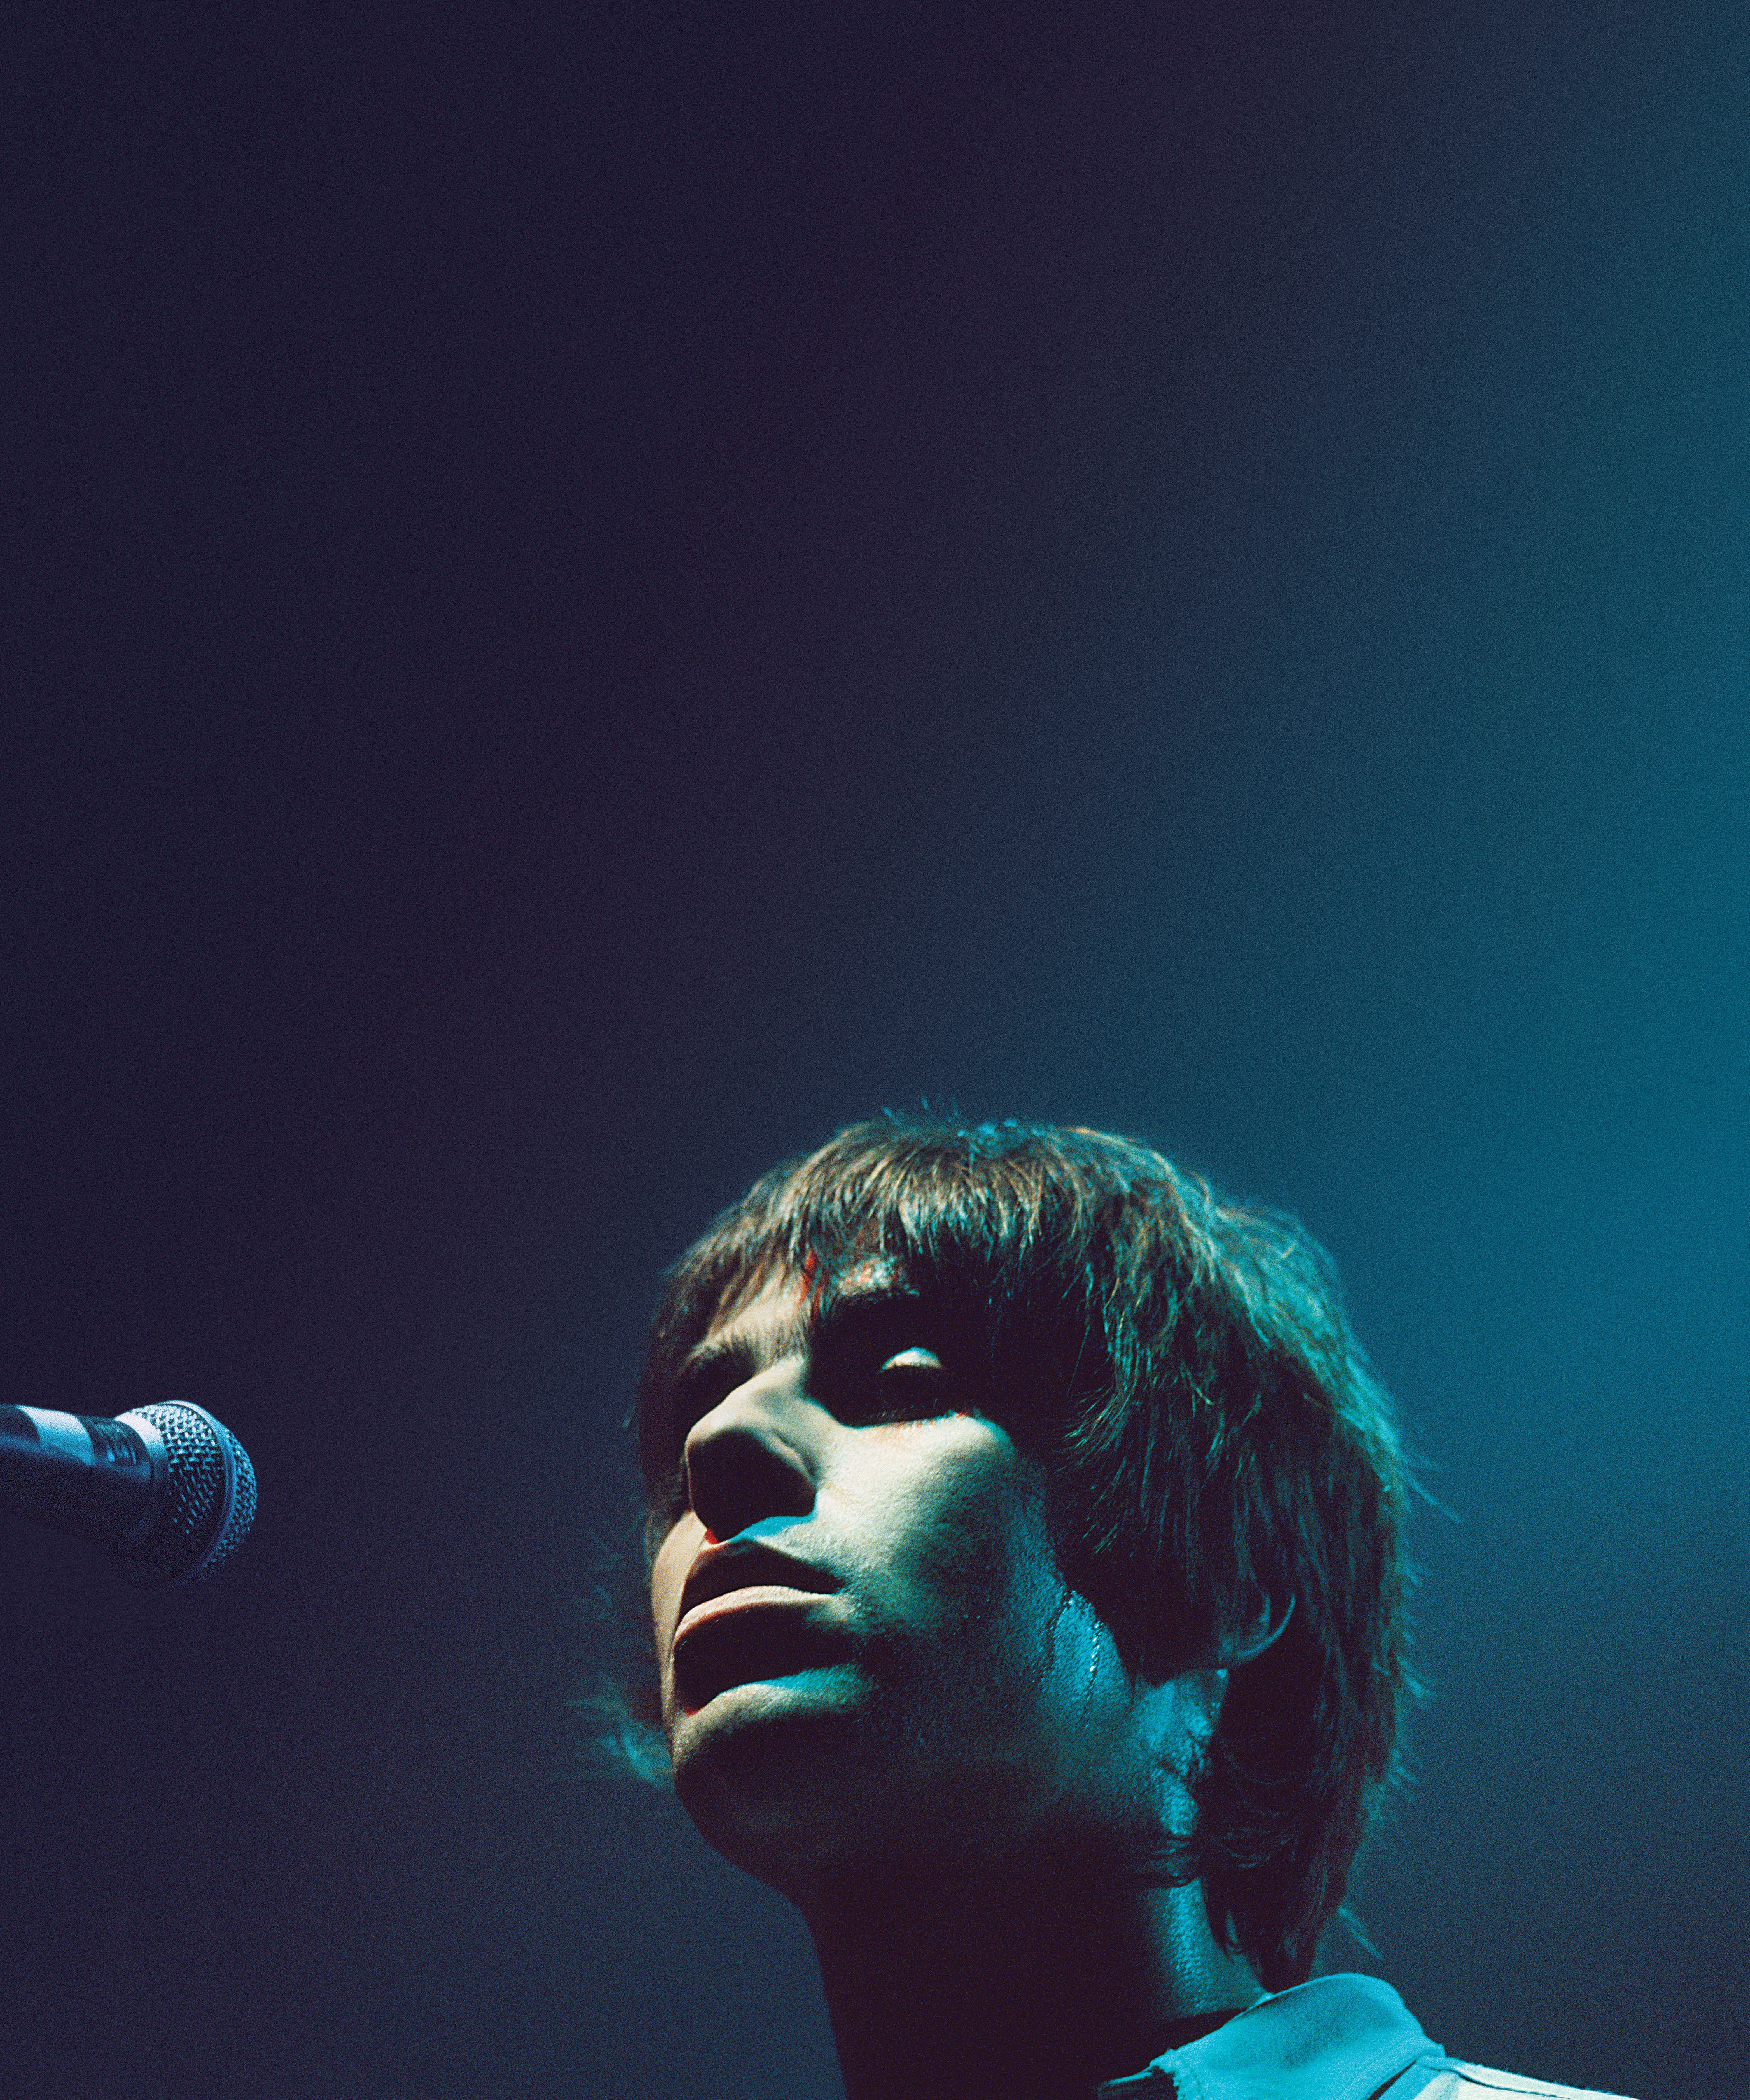 Liam Gallagher - Definitely Maybe 30 Years in Dublin promo photo for MCD presale offer code